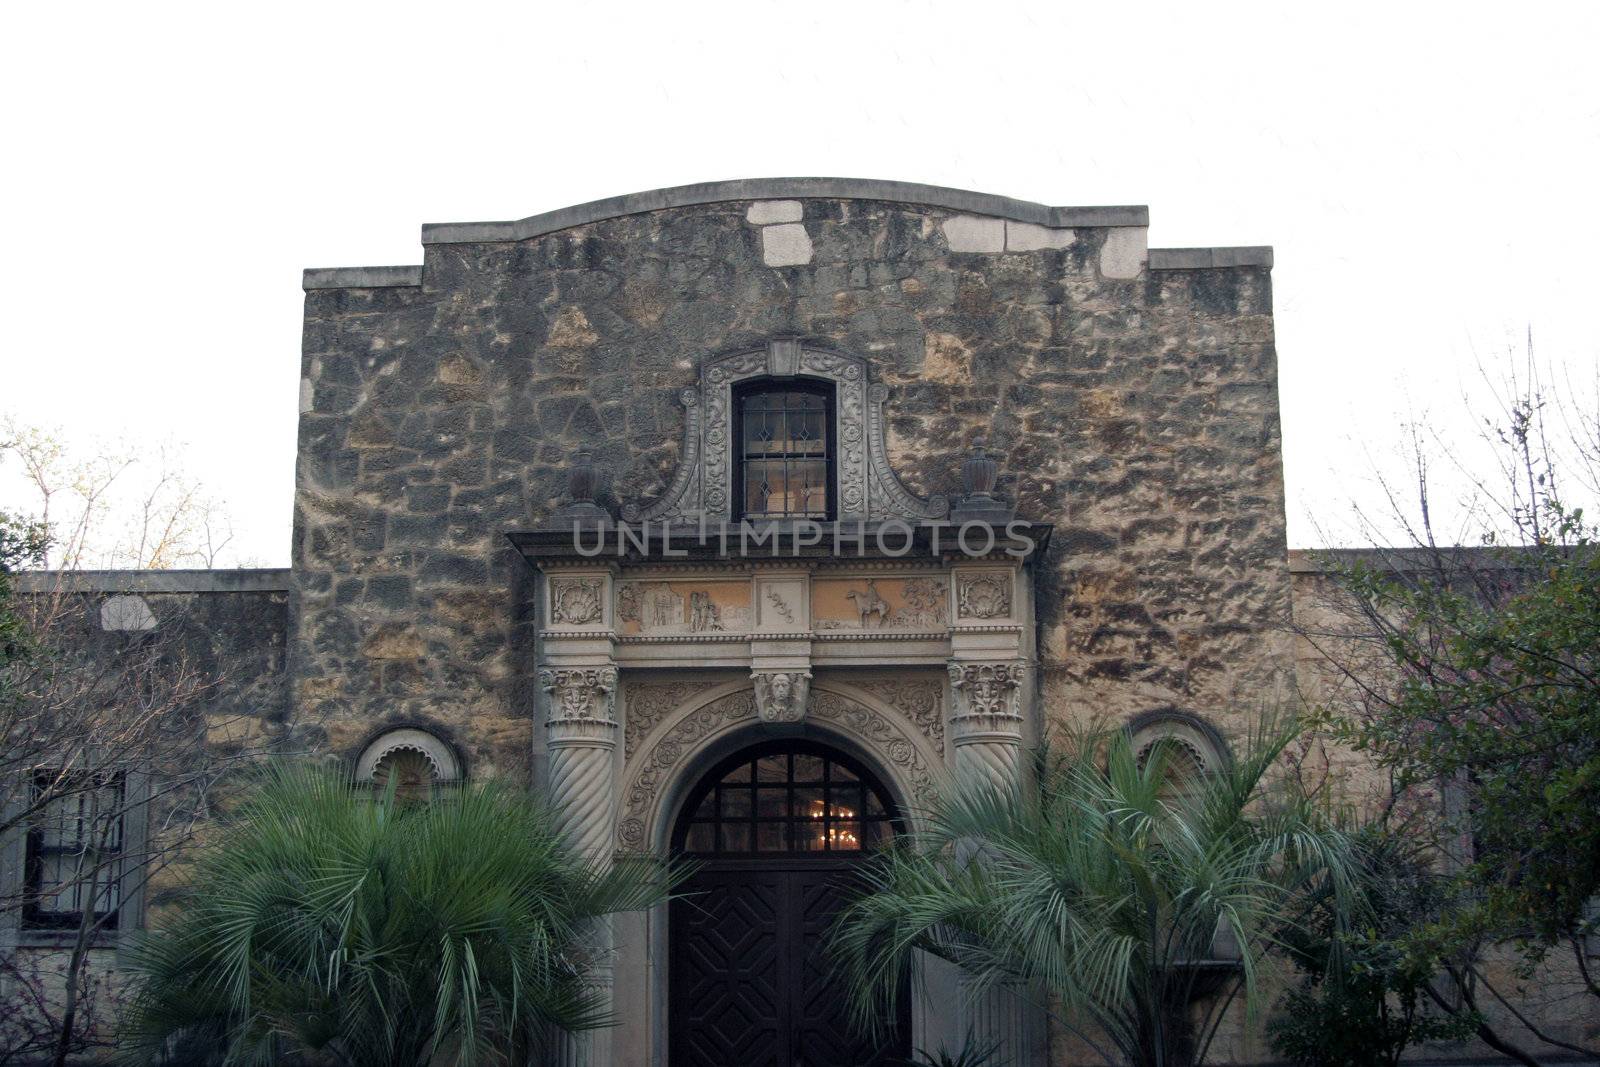 The Alamo located in San Antonio Texas was the location of the great last stand by some of the biggest Texas Heroes.